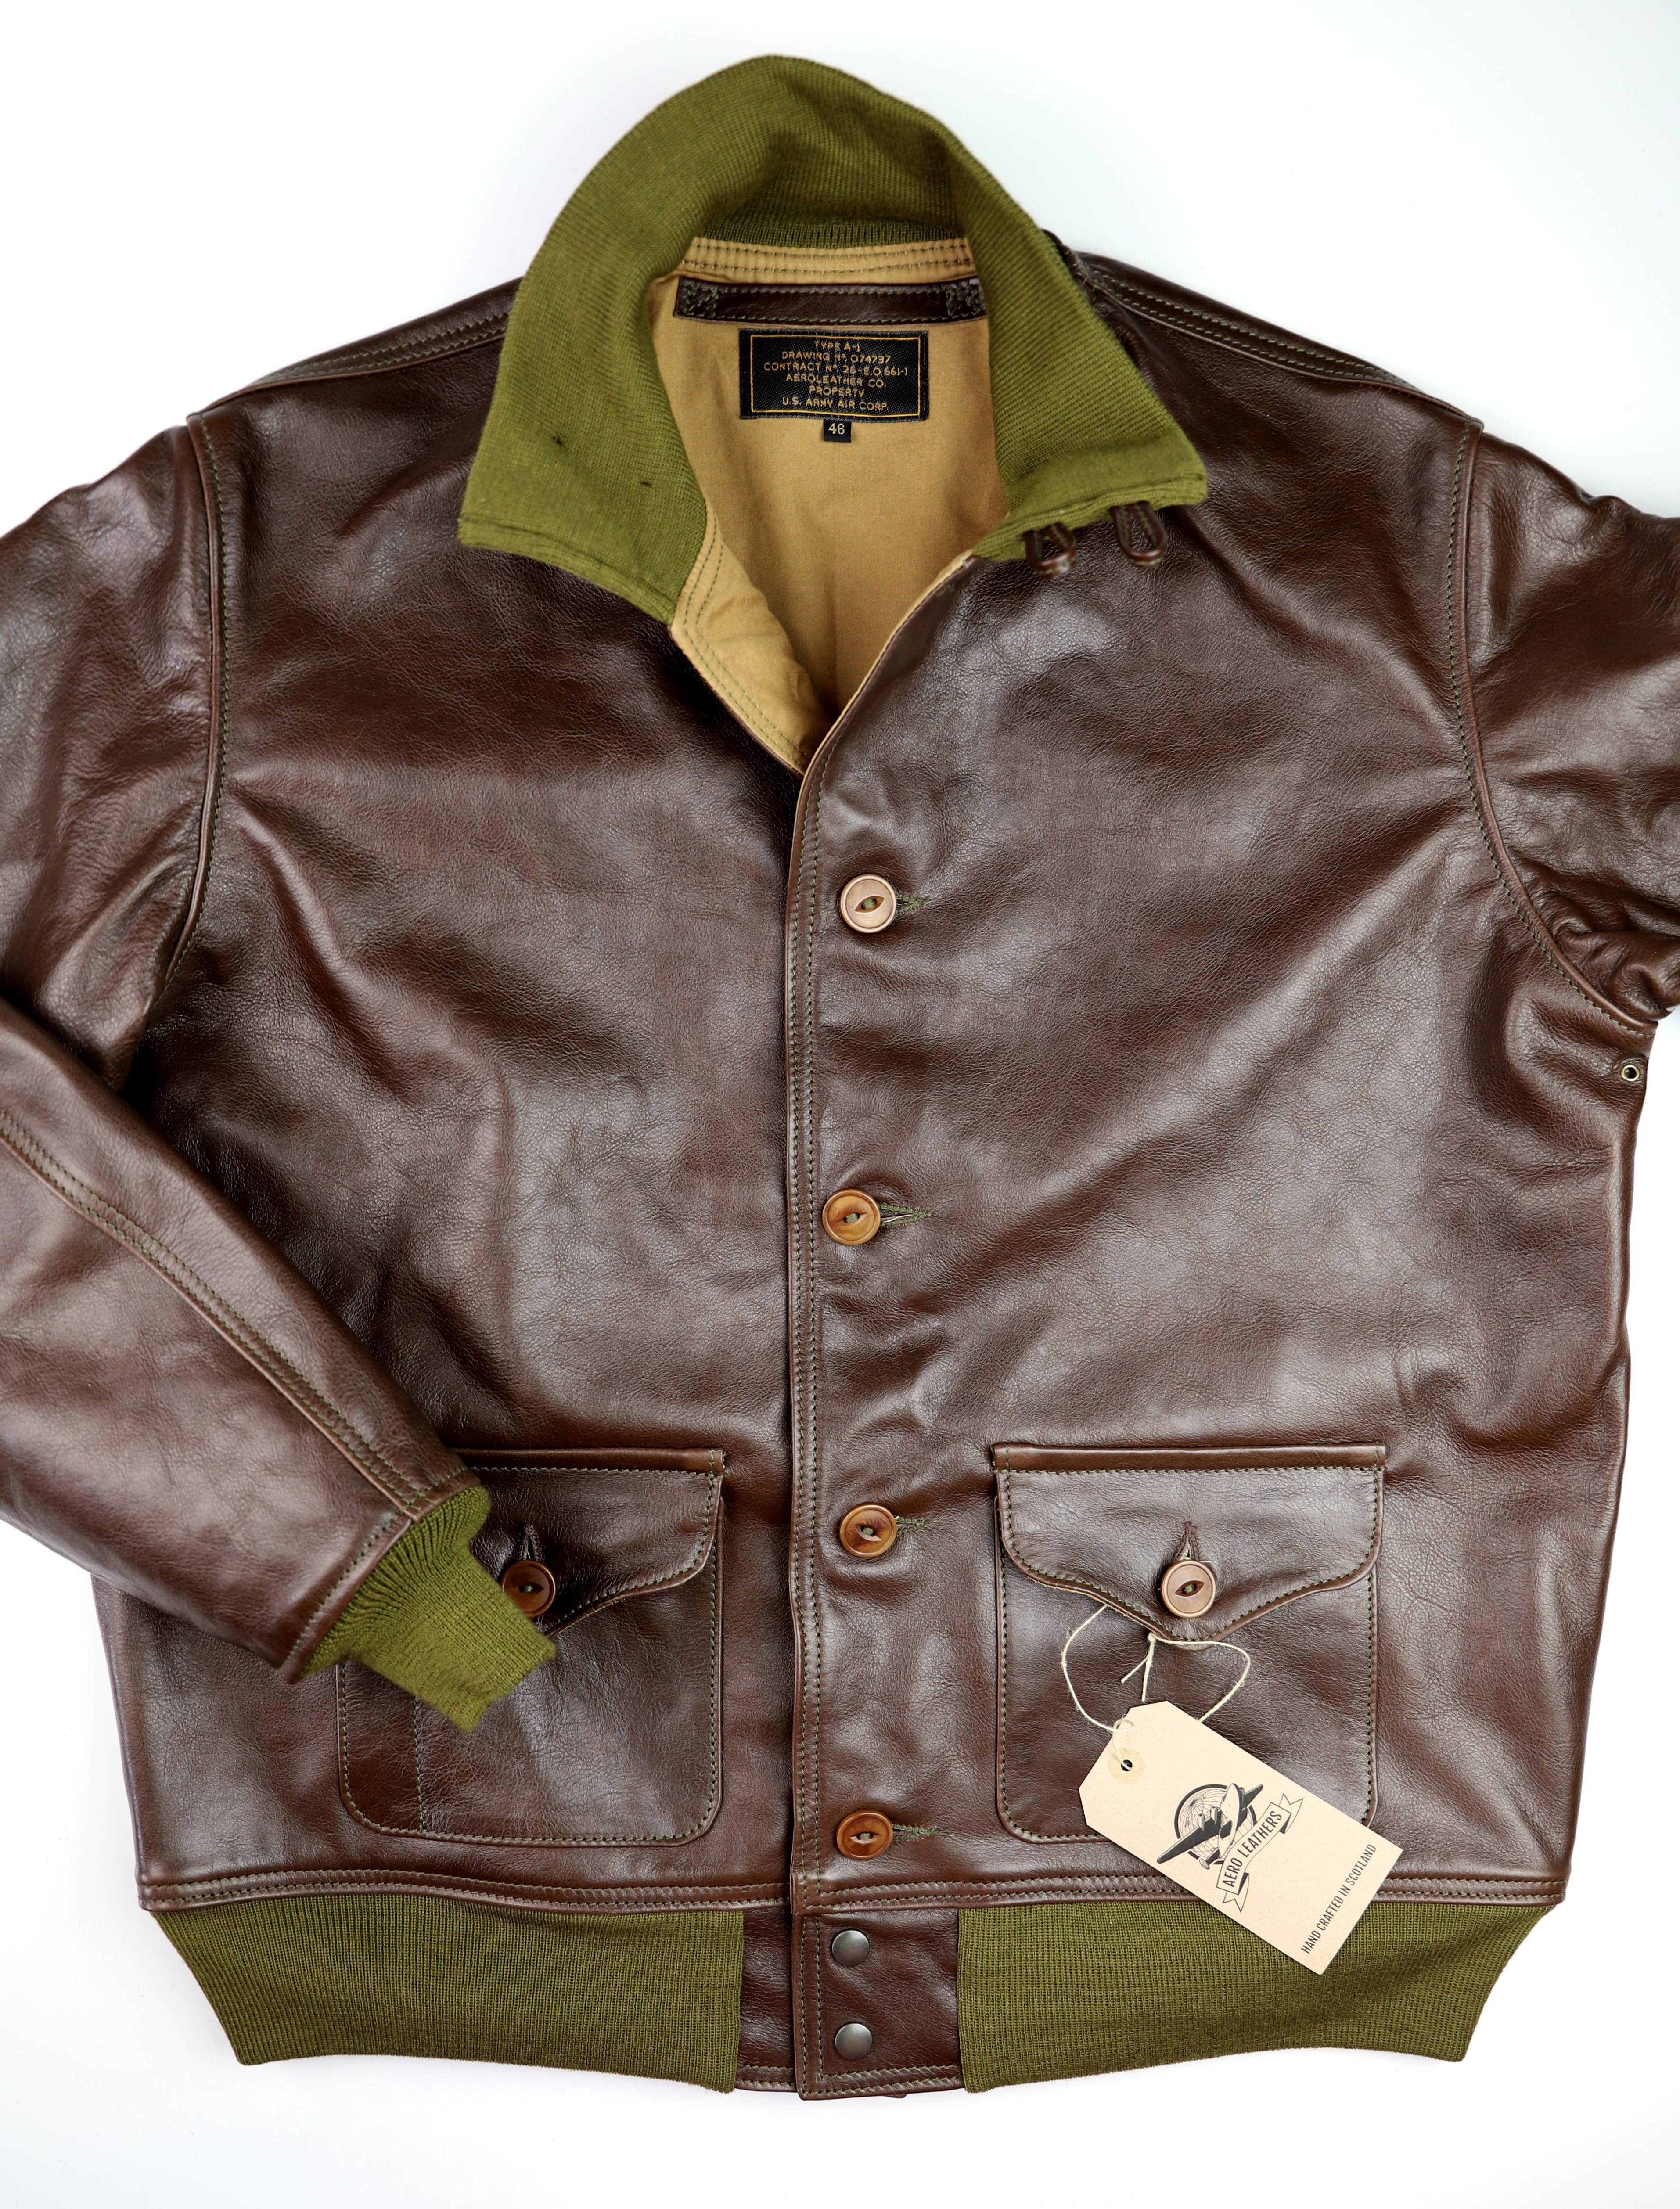 Aero A-1 Seal Vicenza Horsehide AF3B front.jpg